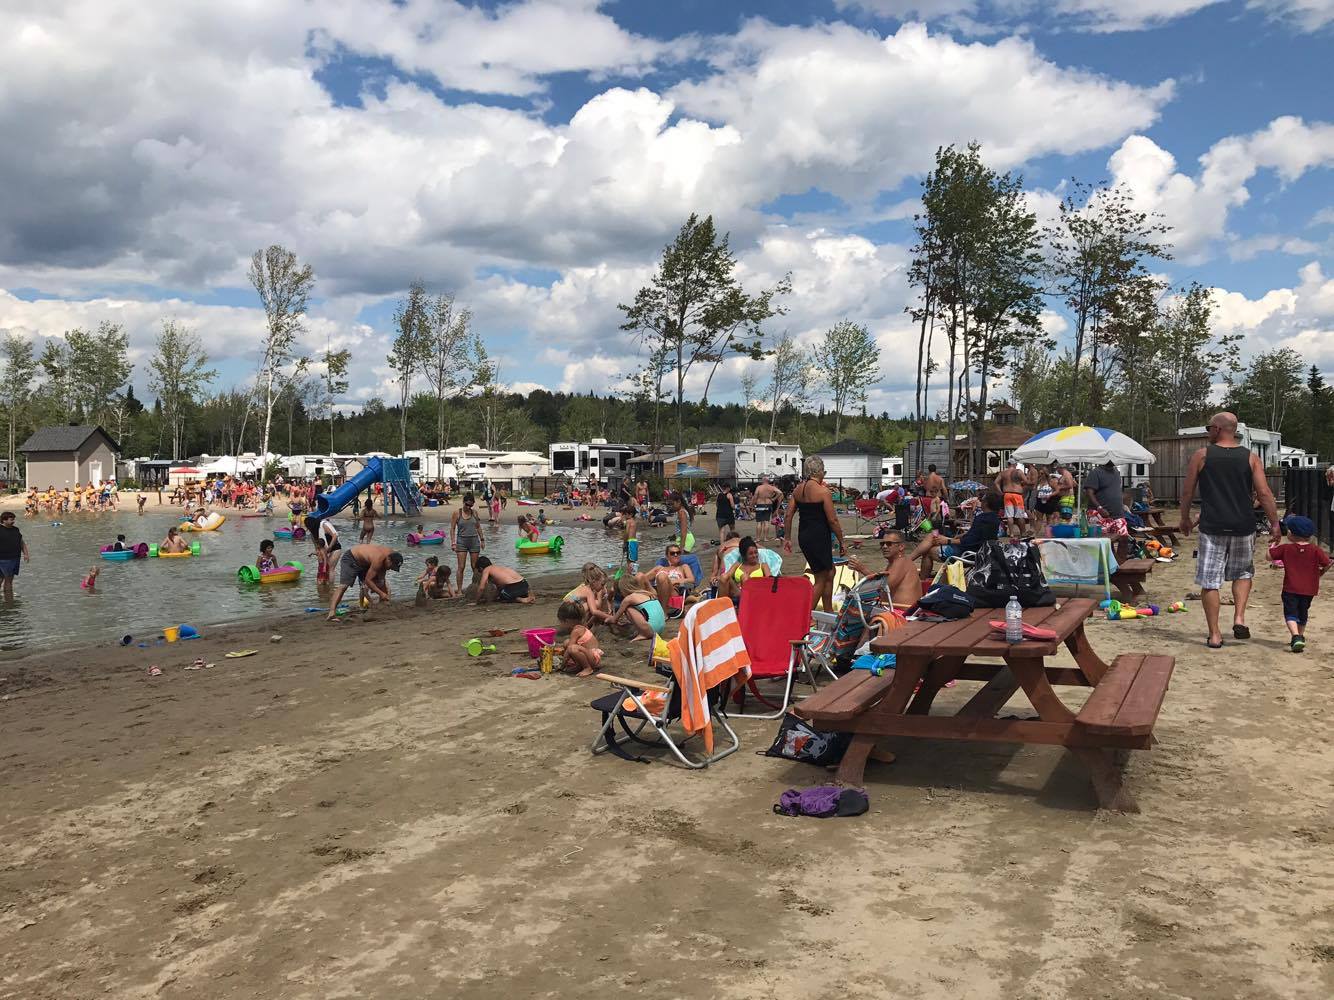 http://www.familycampgrounds.ca/wp-content/uploads/2017/08/beach-party-2017-complexe-atlantide-15.jpg